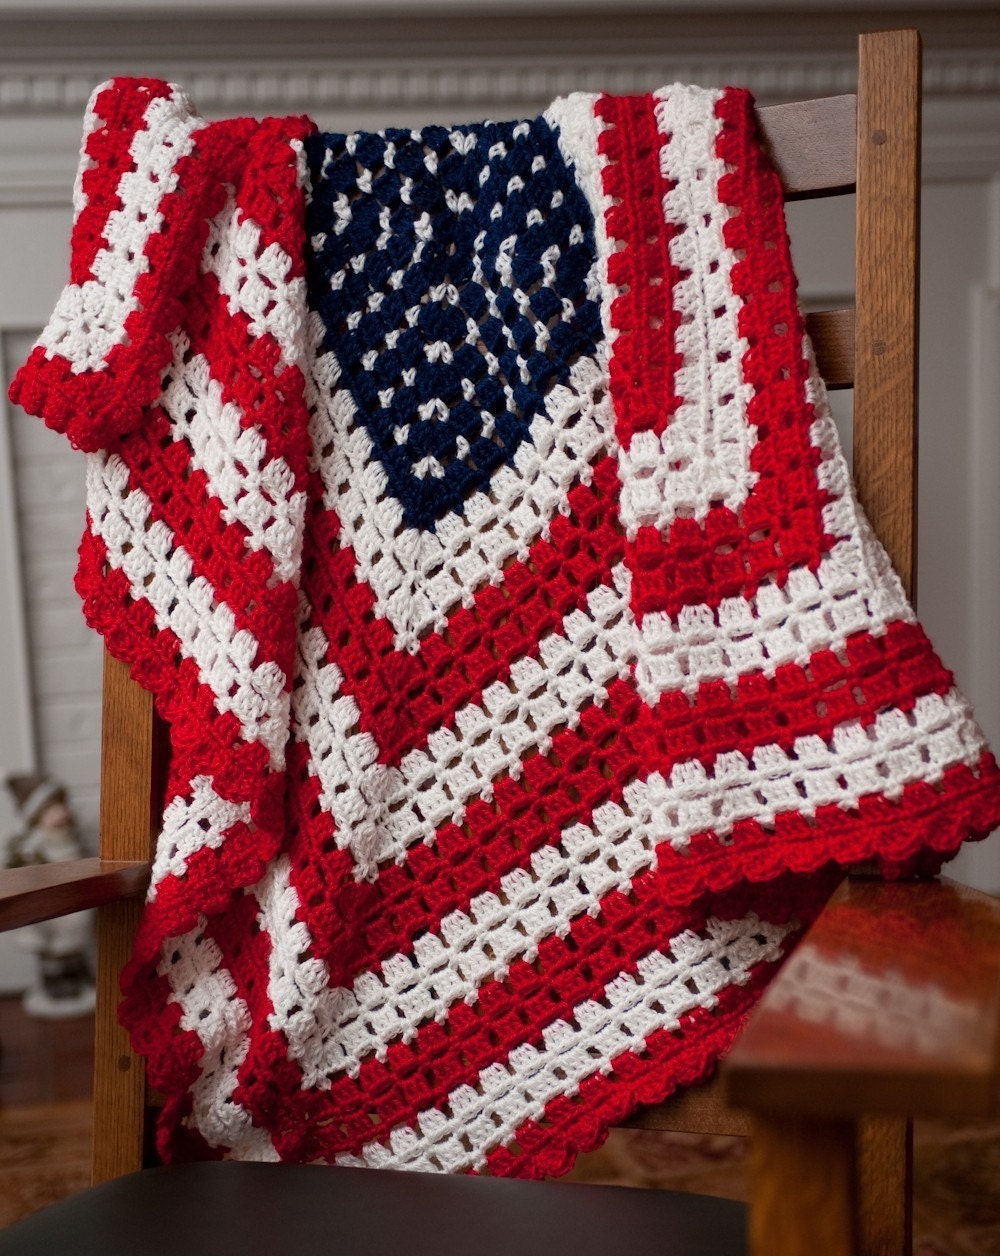 How to Crochet an American Flag Blanket | eHow.com